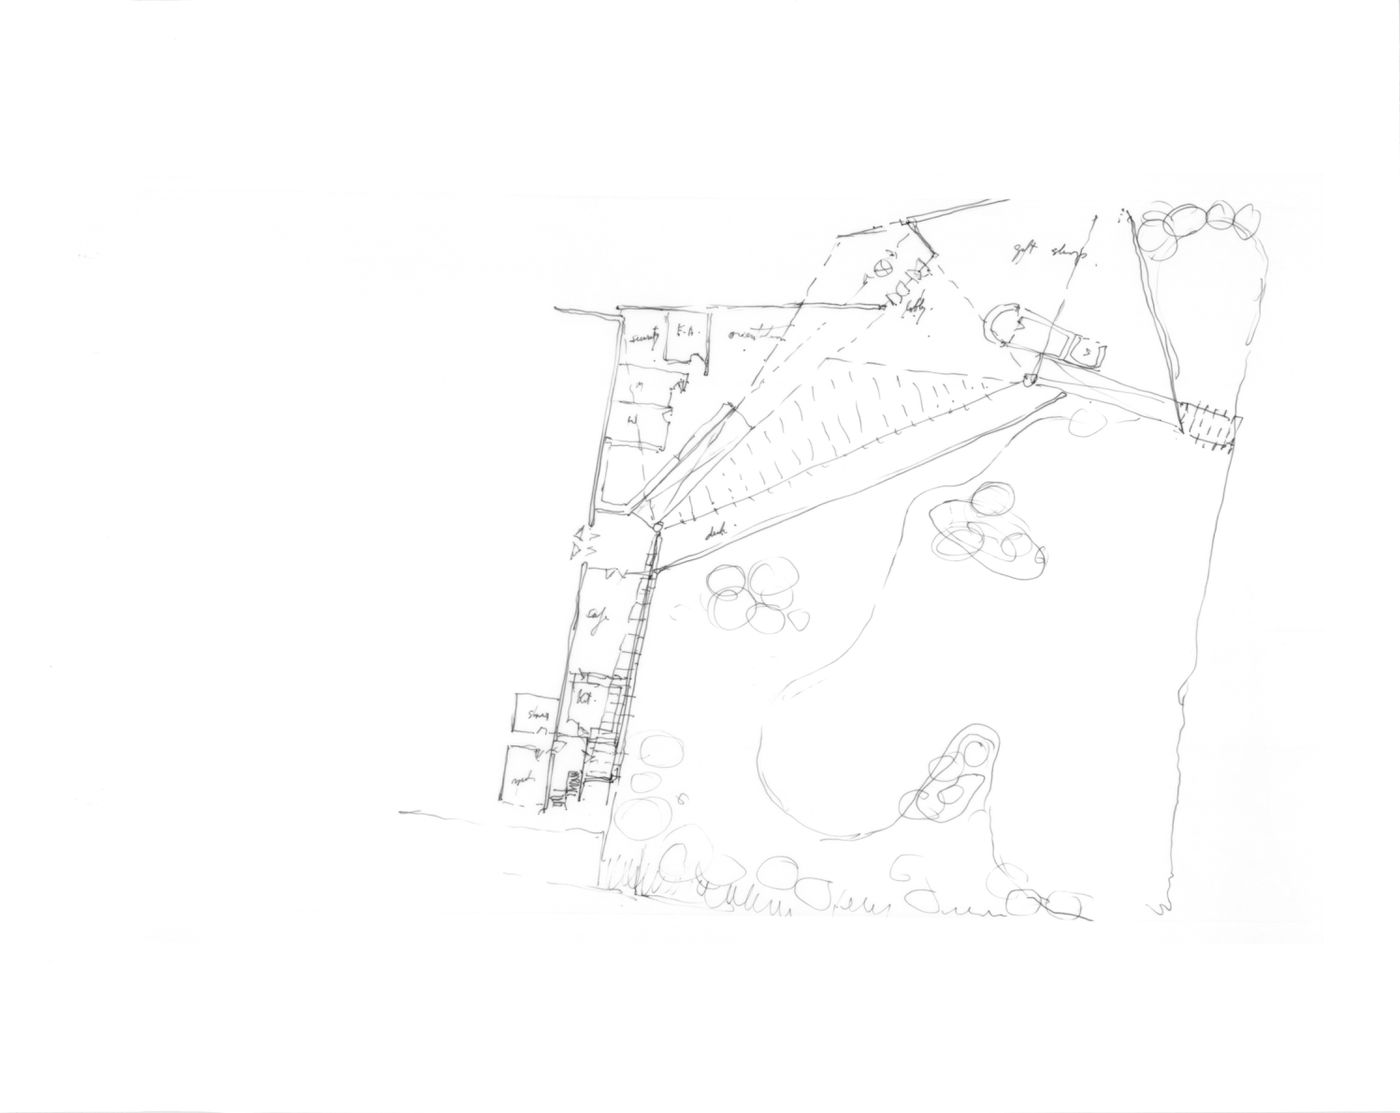 Site plan for the Outdoor Learning Centre, Canadian Canoe Museum, Peterborough, Ontario